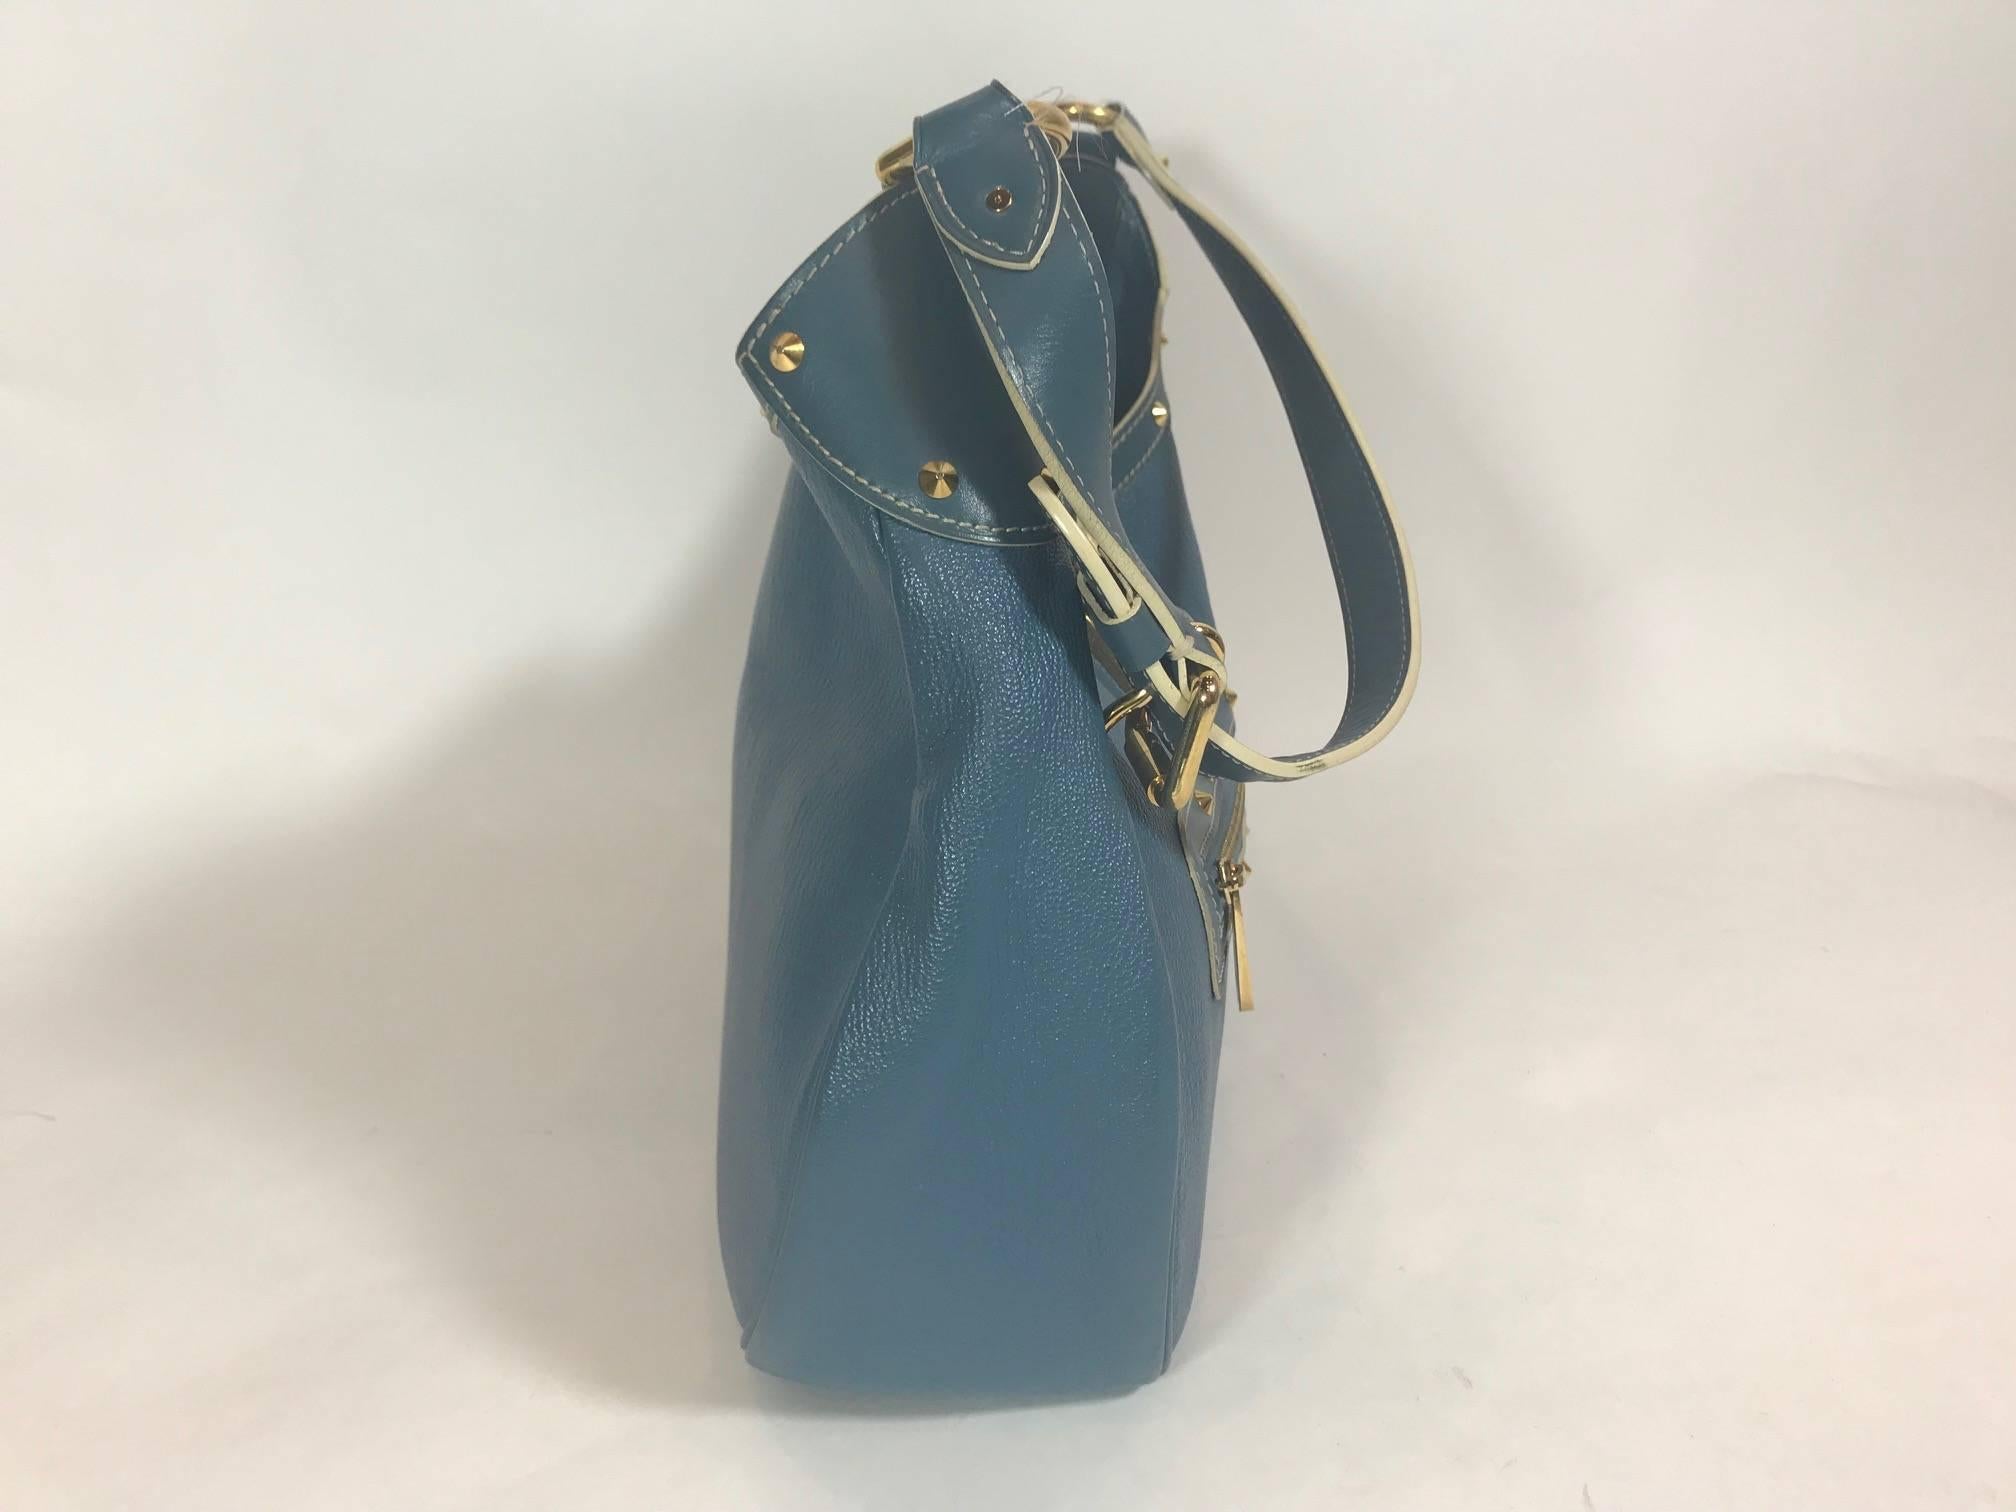 From the well-loved Suhali Leather Collection comes this rare and discontinued Louis Vuitton bag. Crafted in France of luxurious blue deeply grained goat leather, this over the shoulder bag is adorned with a LV engraved polished golden metal S-lock